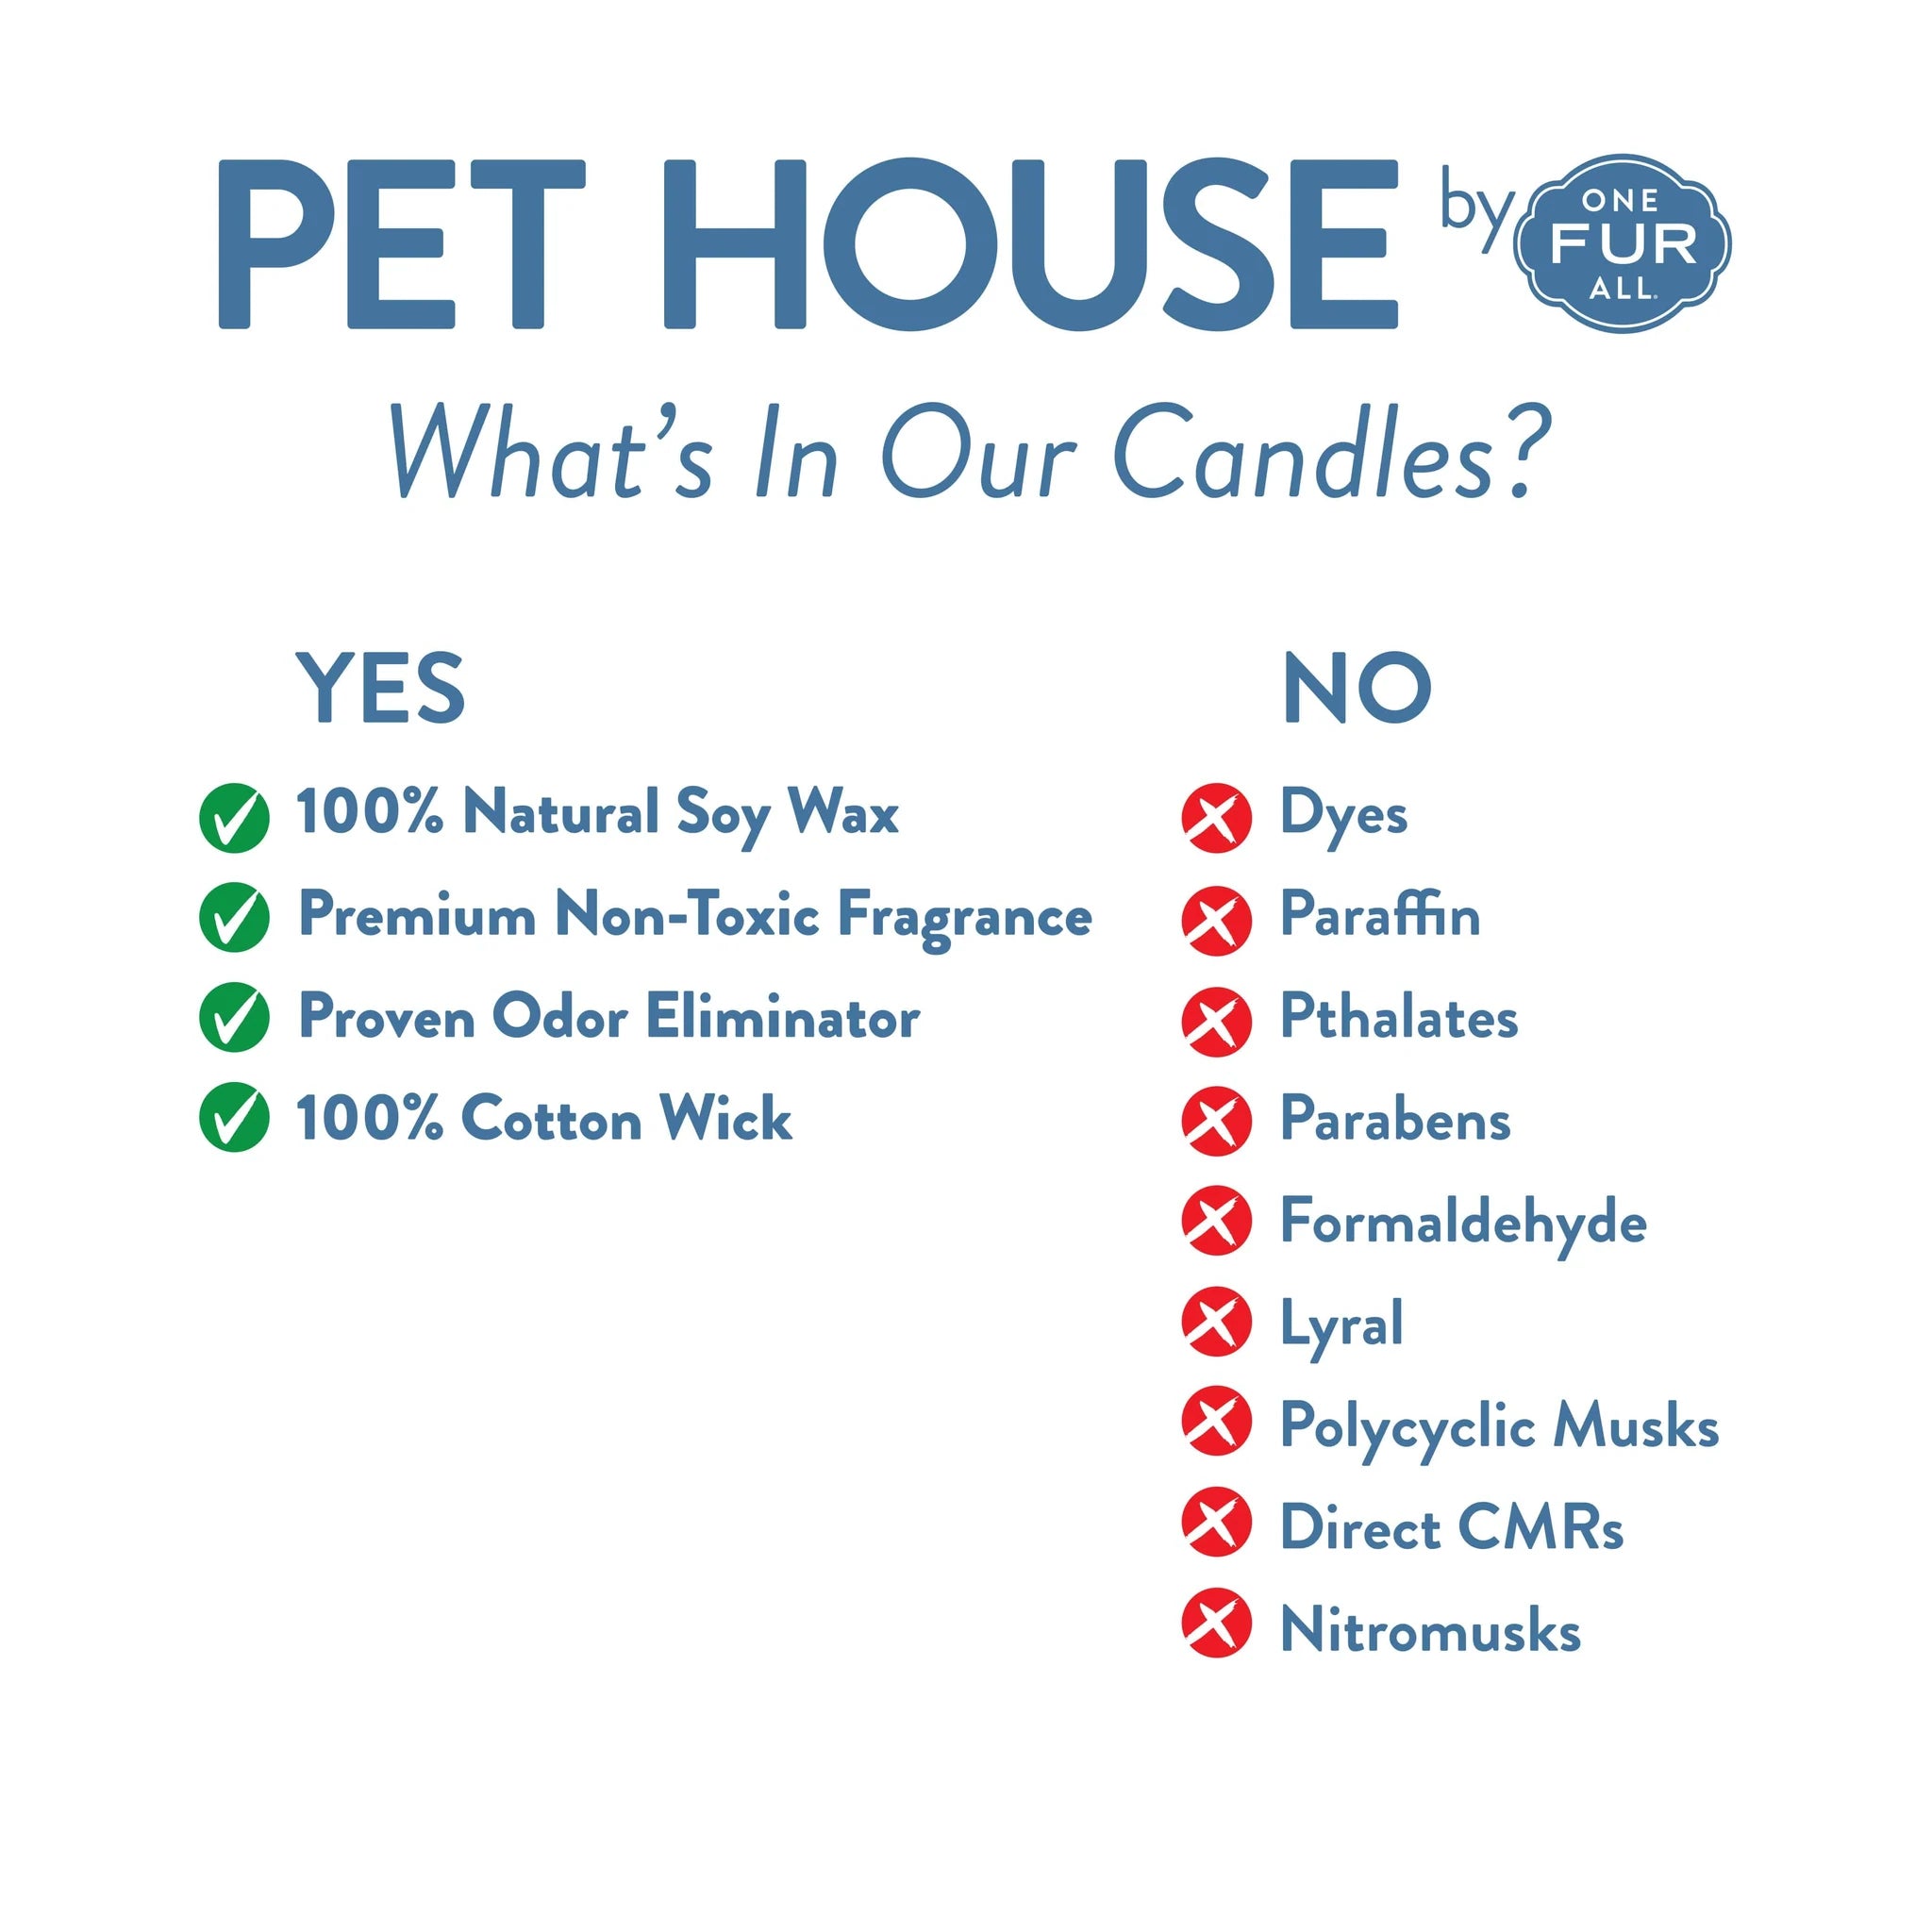 One Fur All Pet House Candle - Caramel Latte